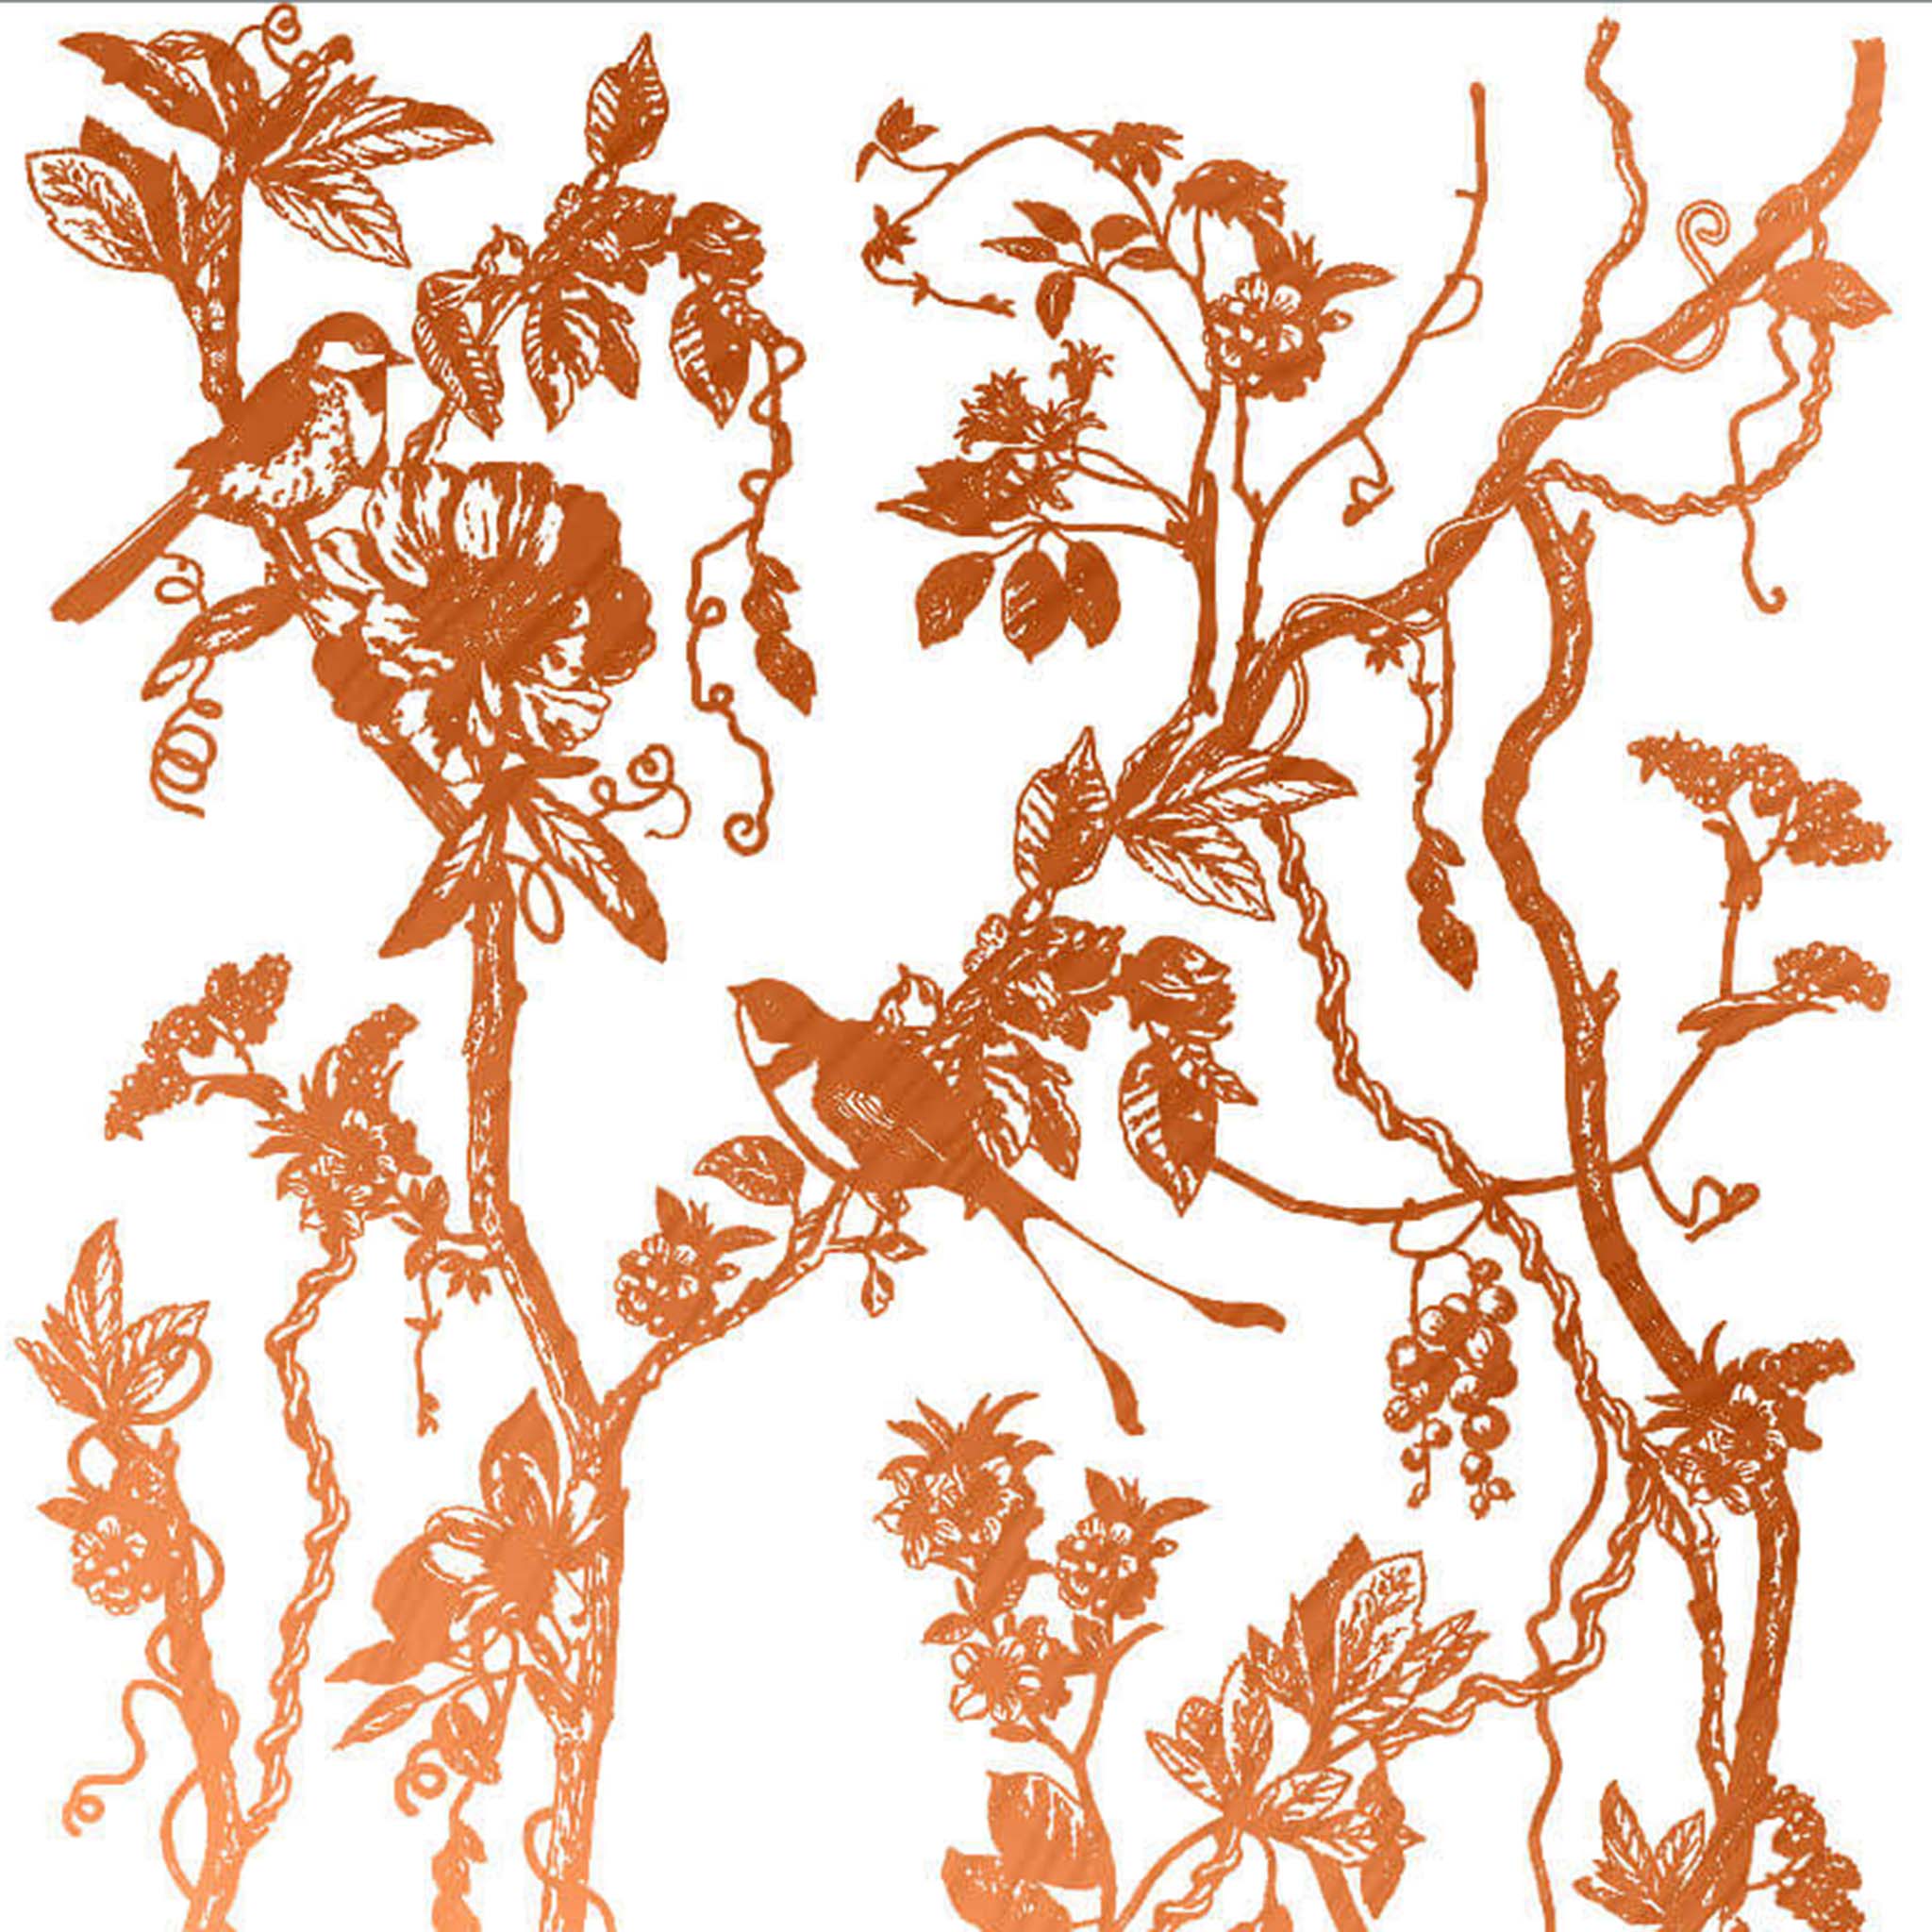 Close-up of a copper foil transfer design featuring charming birds perched on blooming branches and vines is against a white background.